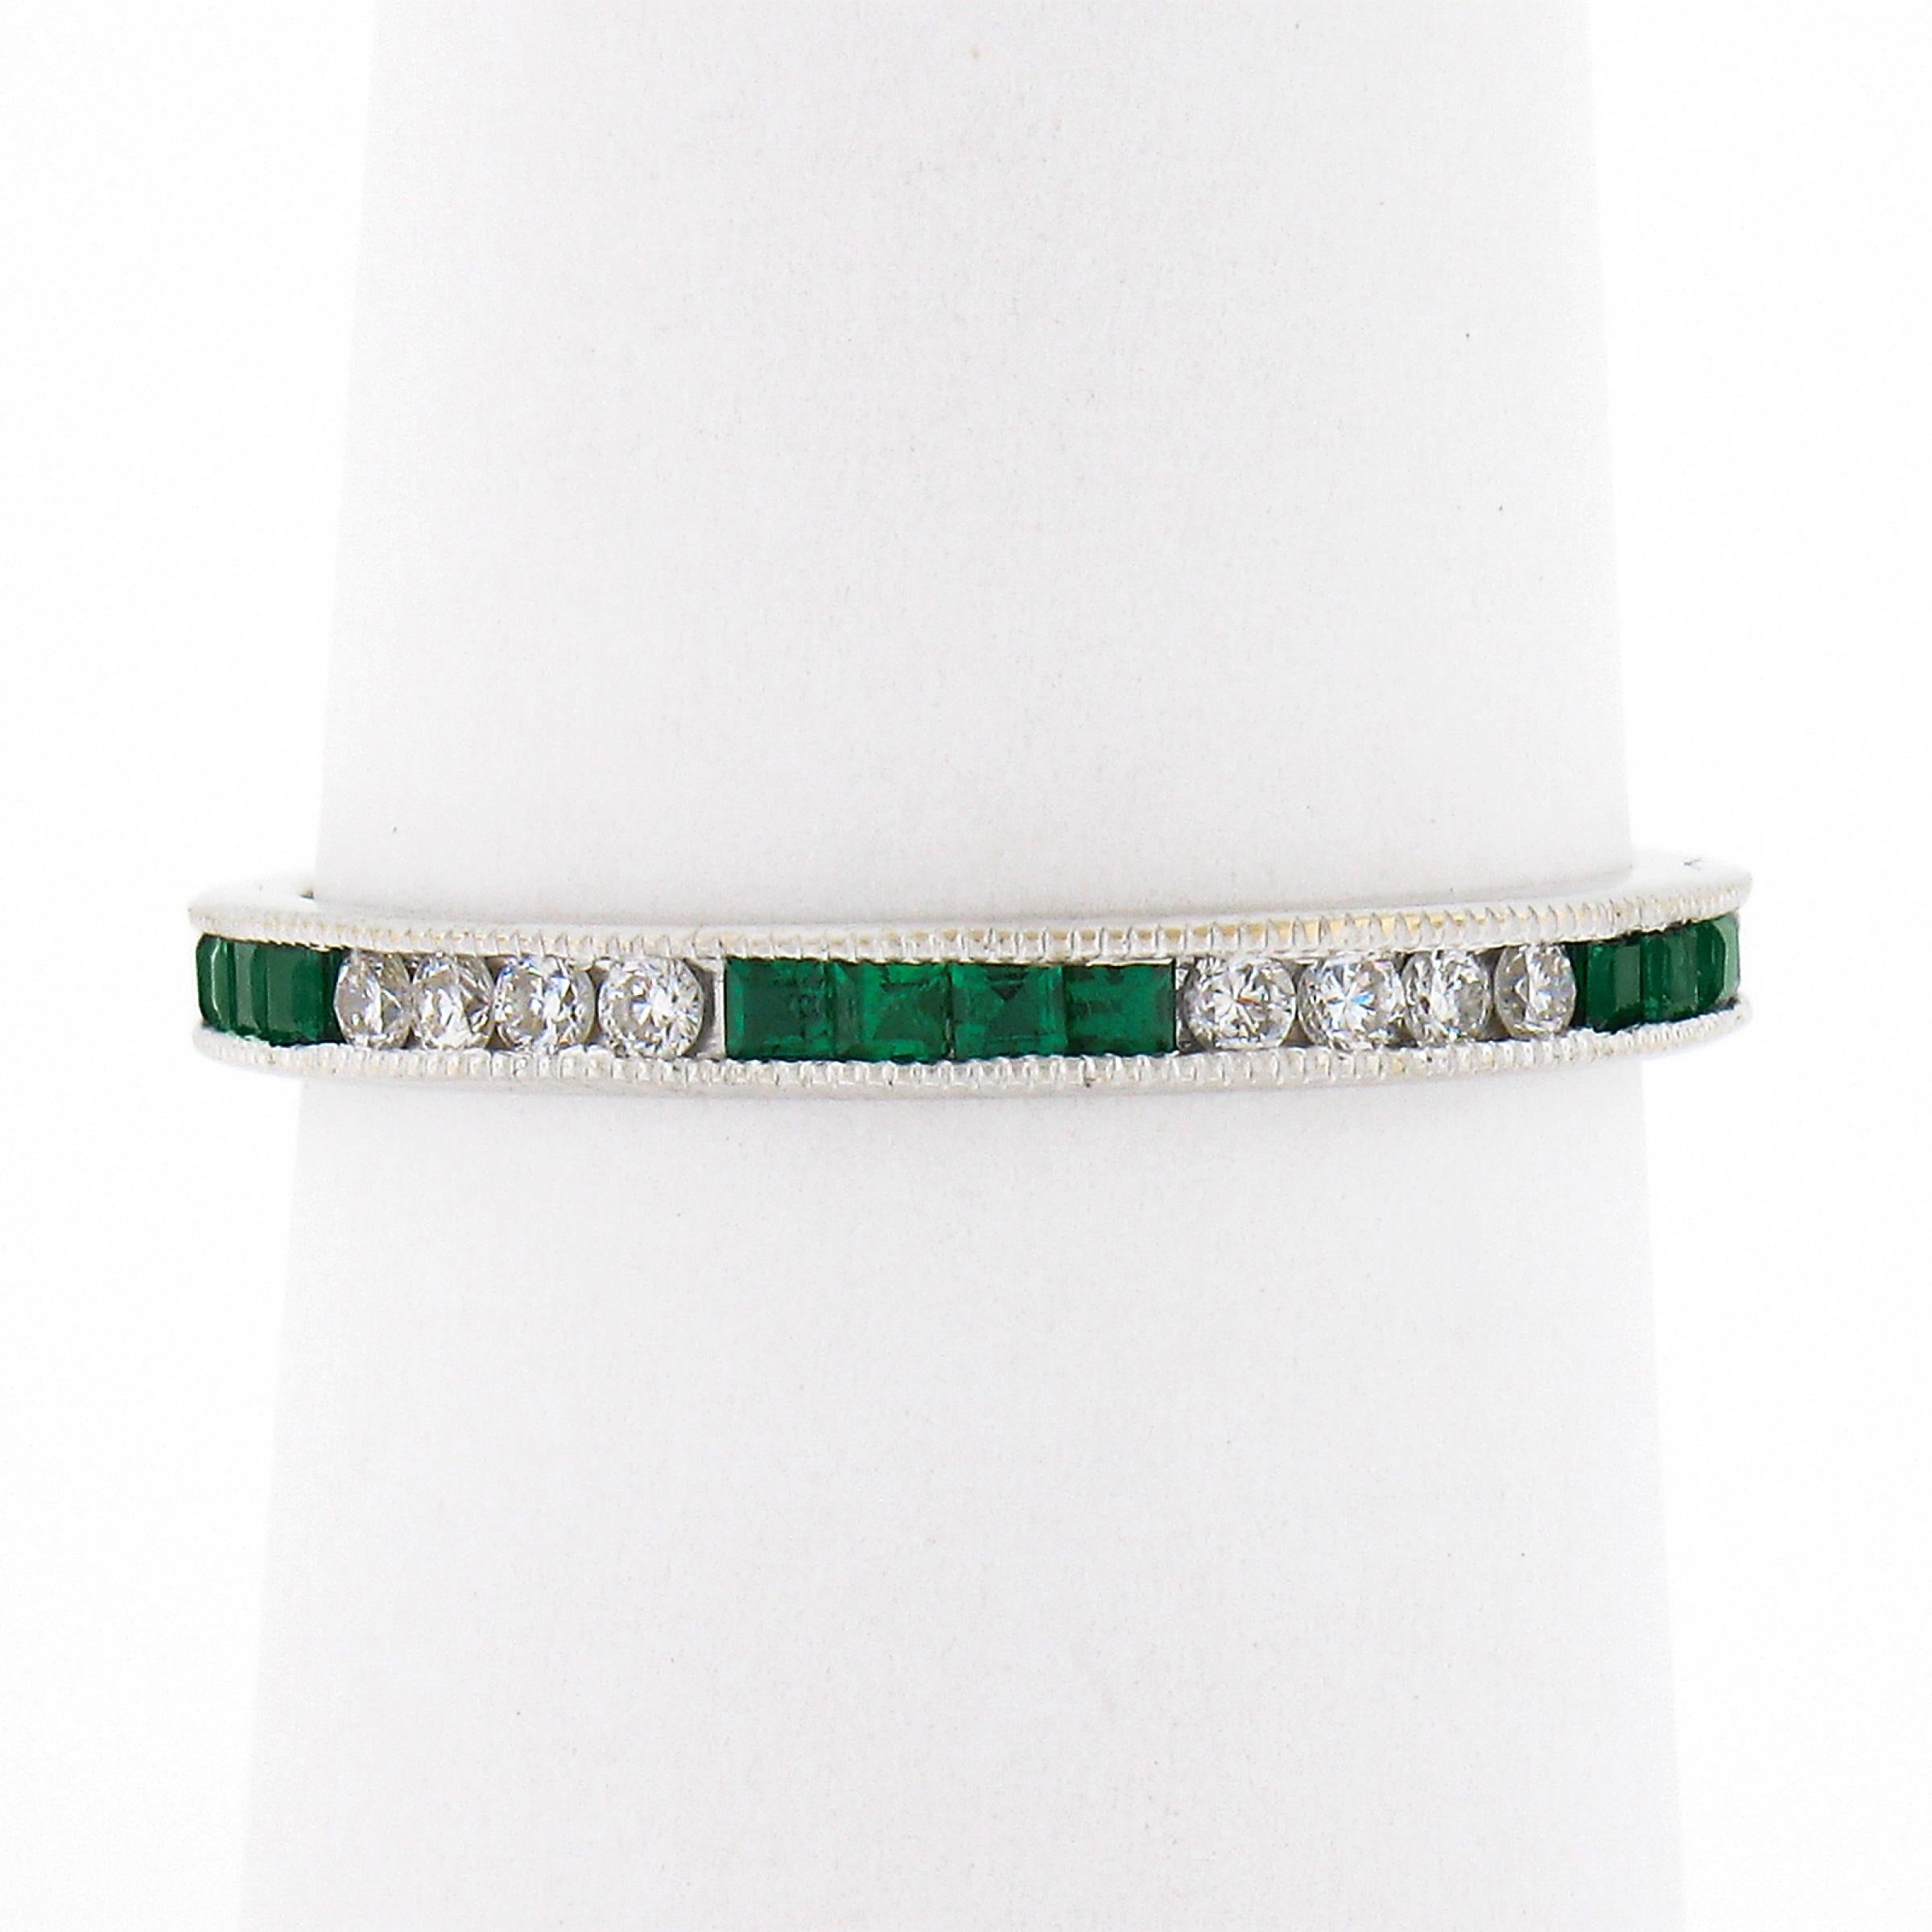 This marvelous emerald and diamond eternity band ring is crafted in solid 18k white gold and features a well made channel setting which is delicately milgrain etched throughout both sides, and securely holds the stunning stones entirely around the